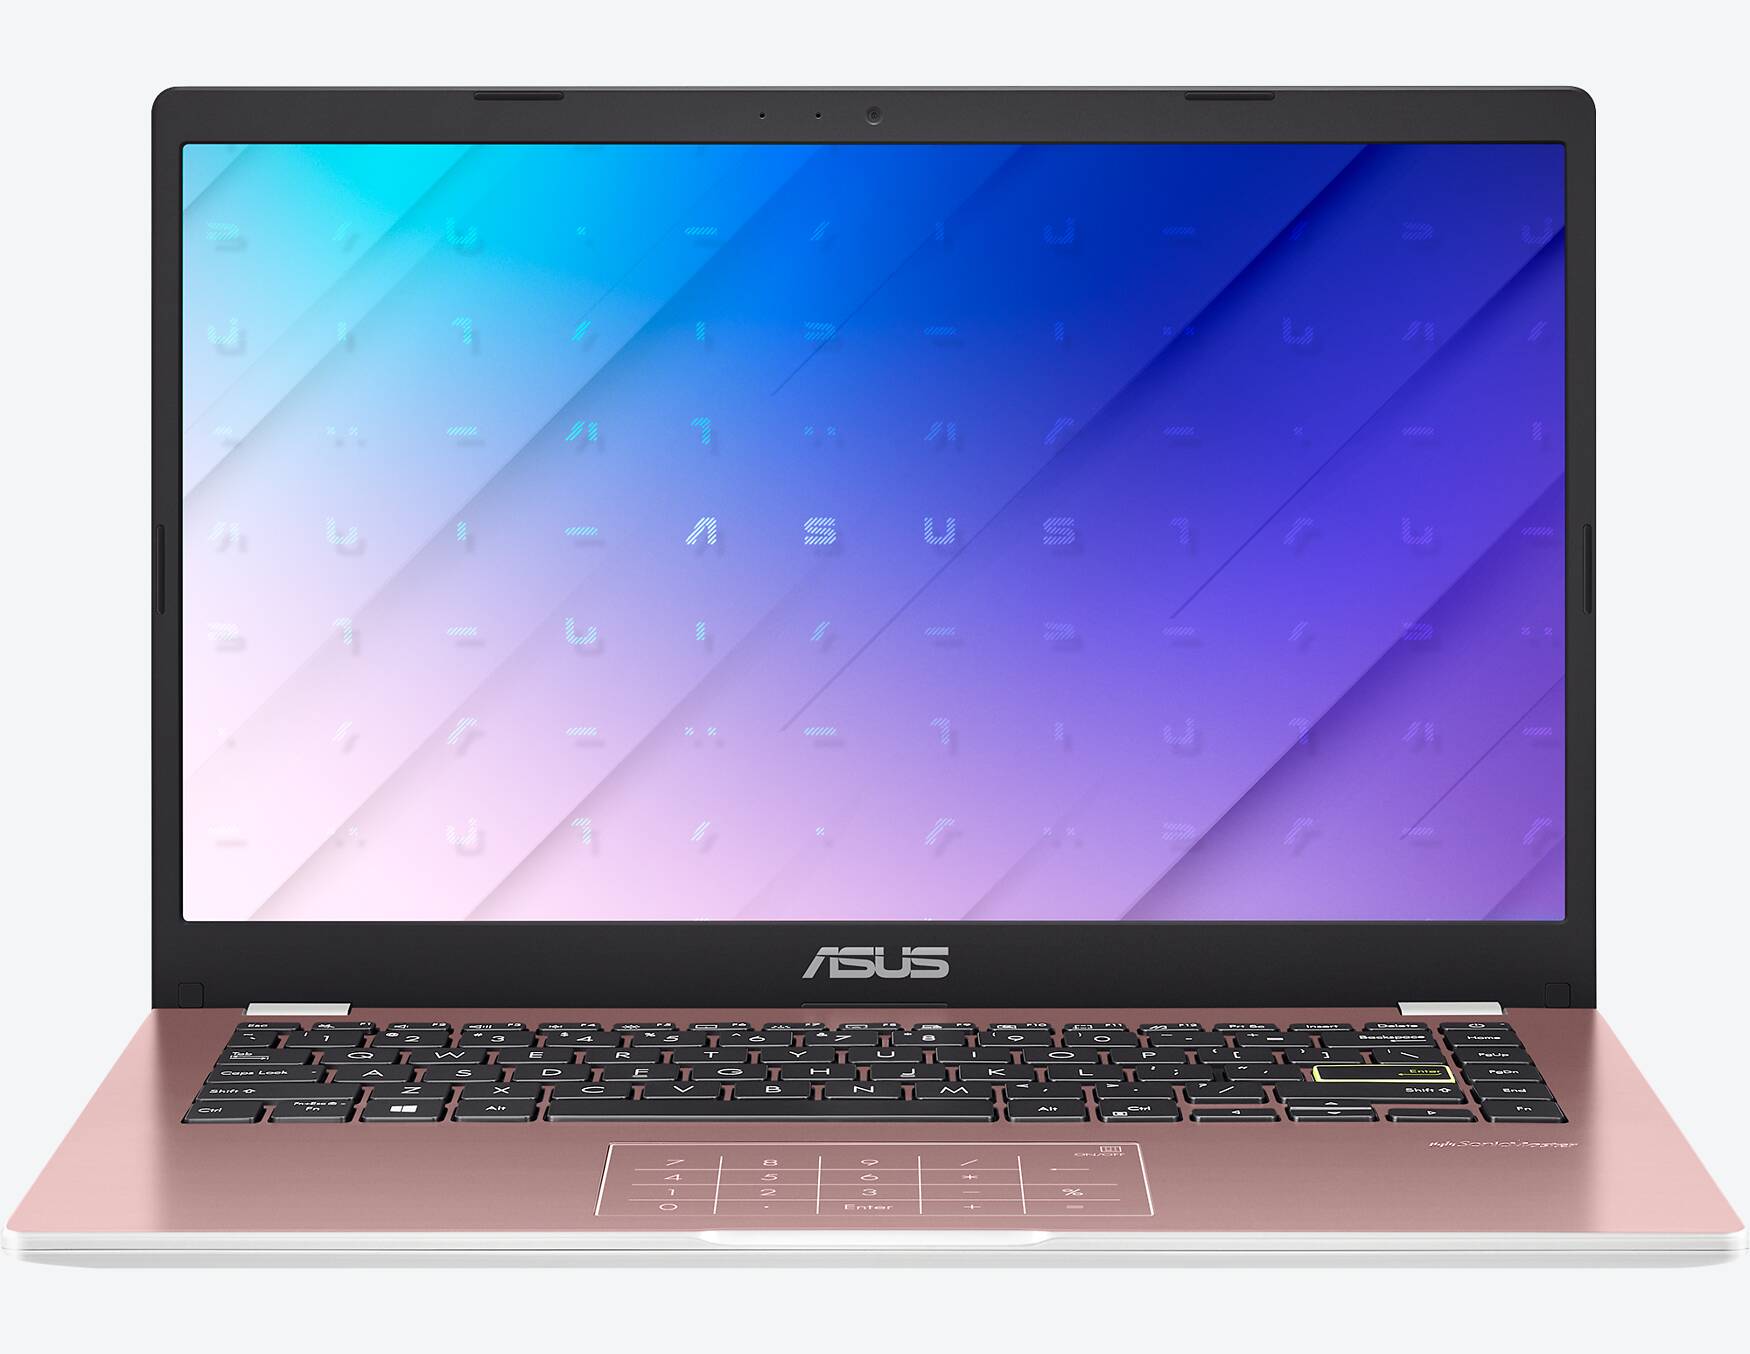 Asus Vivobook E410ma Bv076t Rosa Tests And Daten 4770